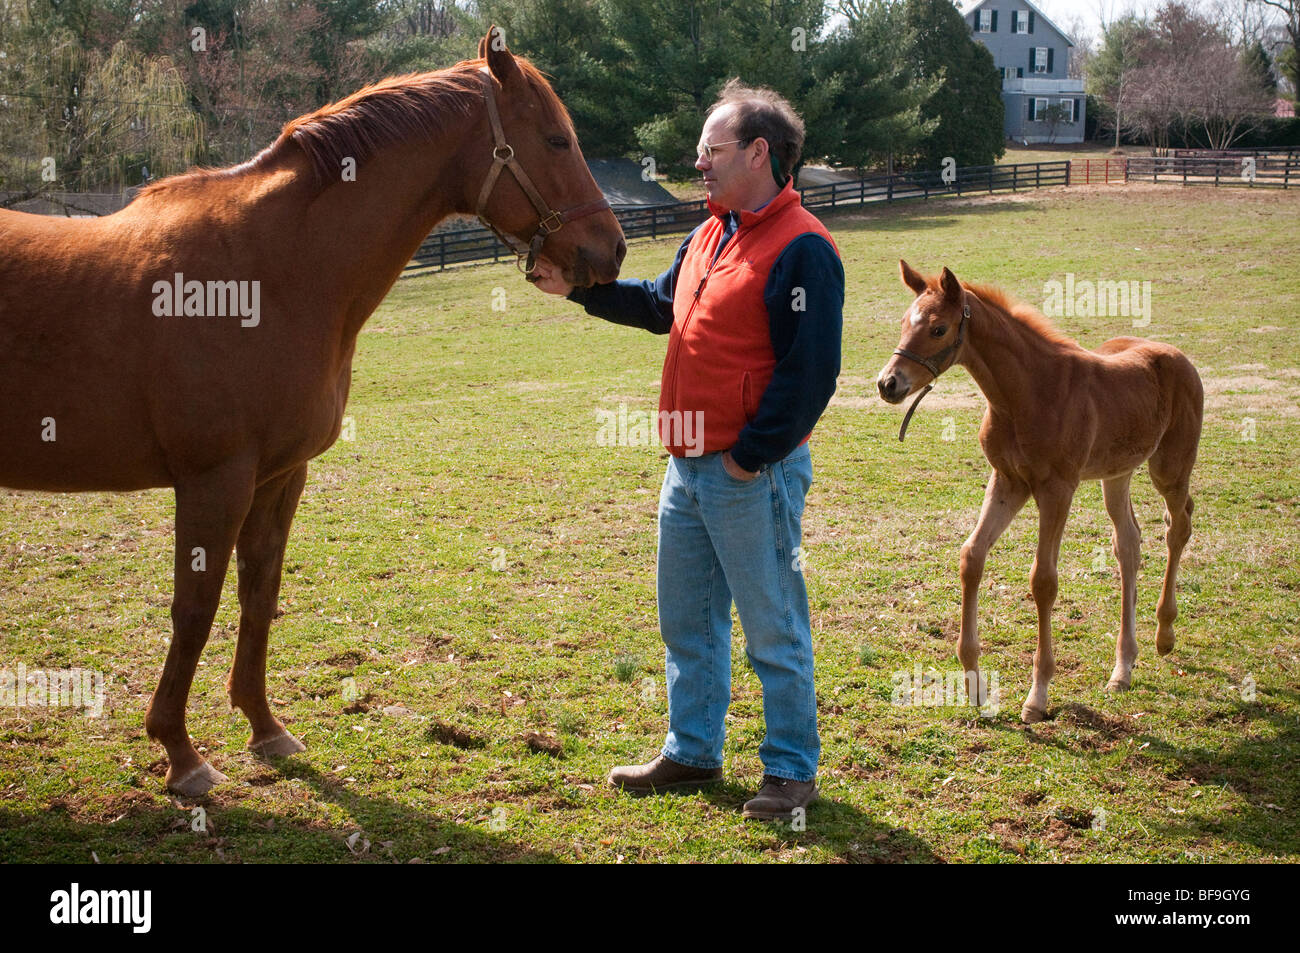 Josh Pons, Country Life Farm , with mare and foal Stock Photo